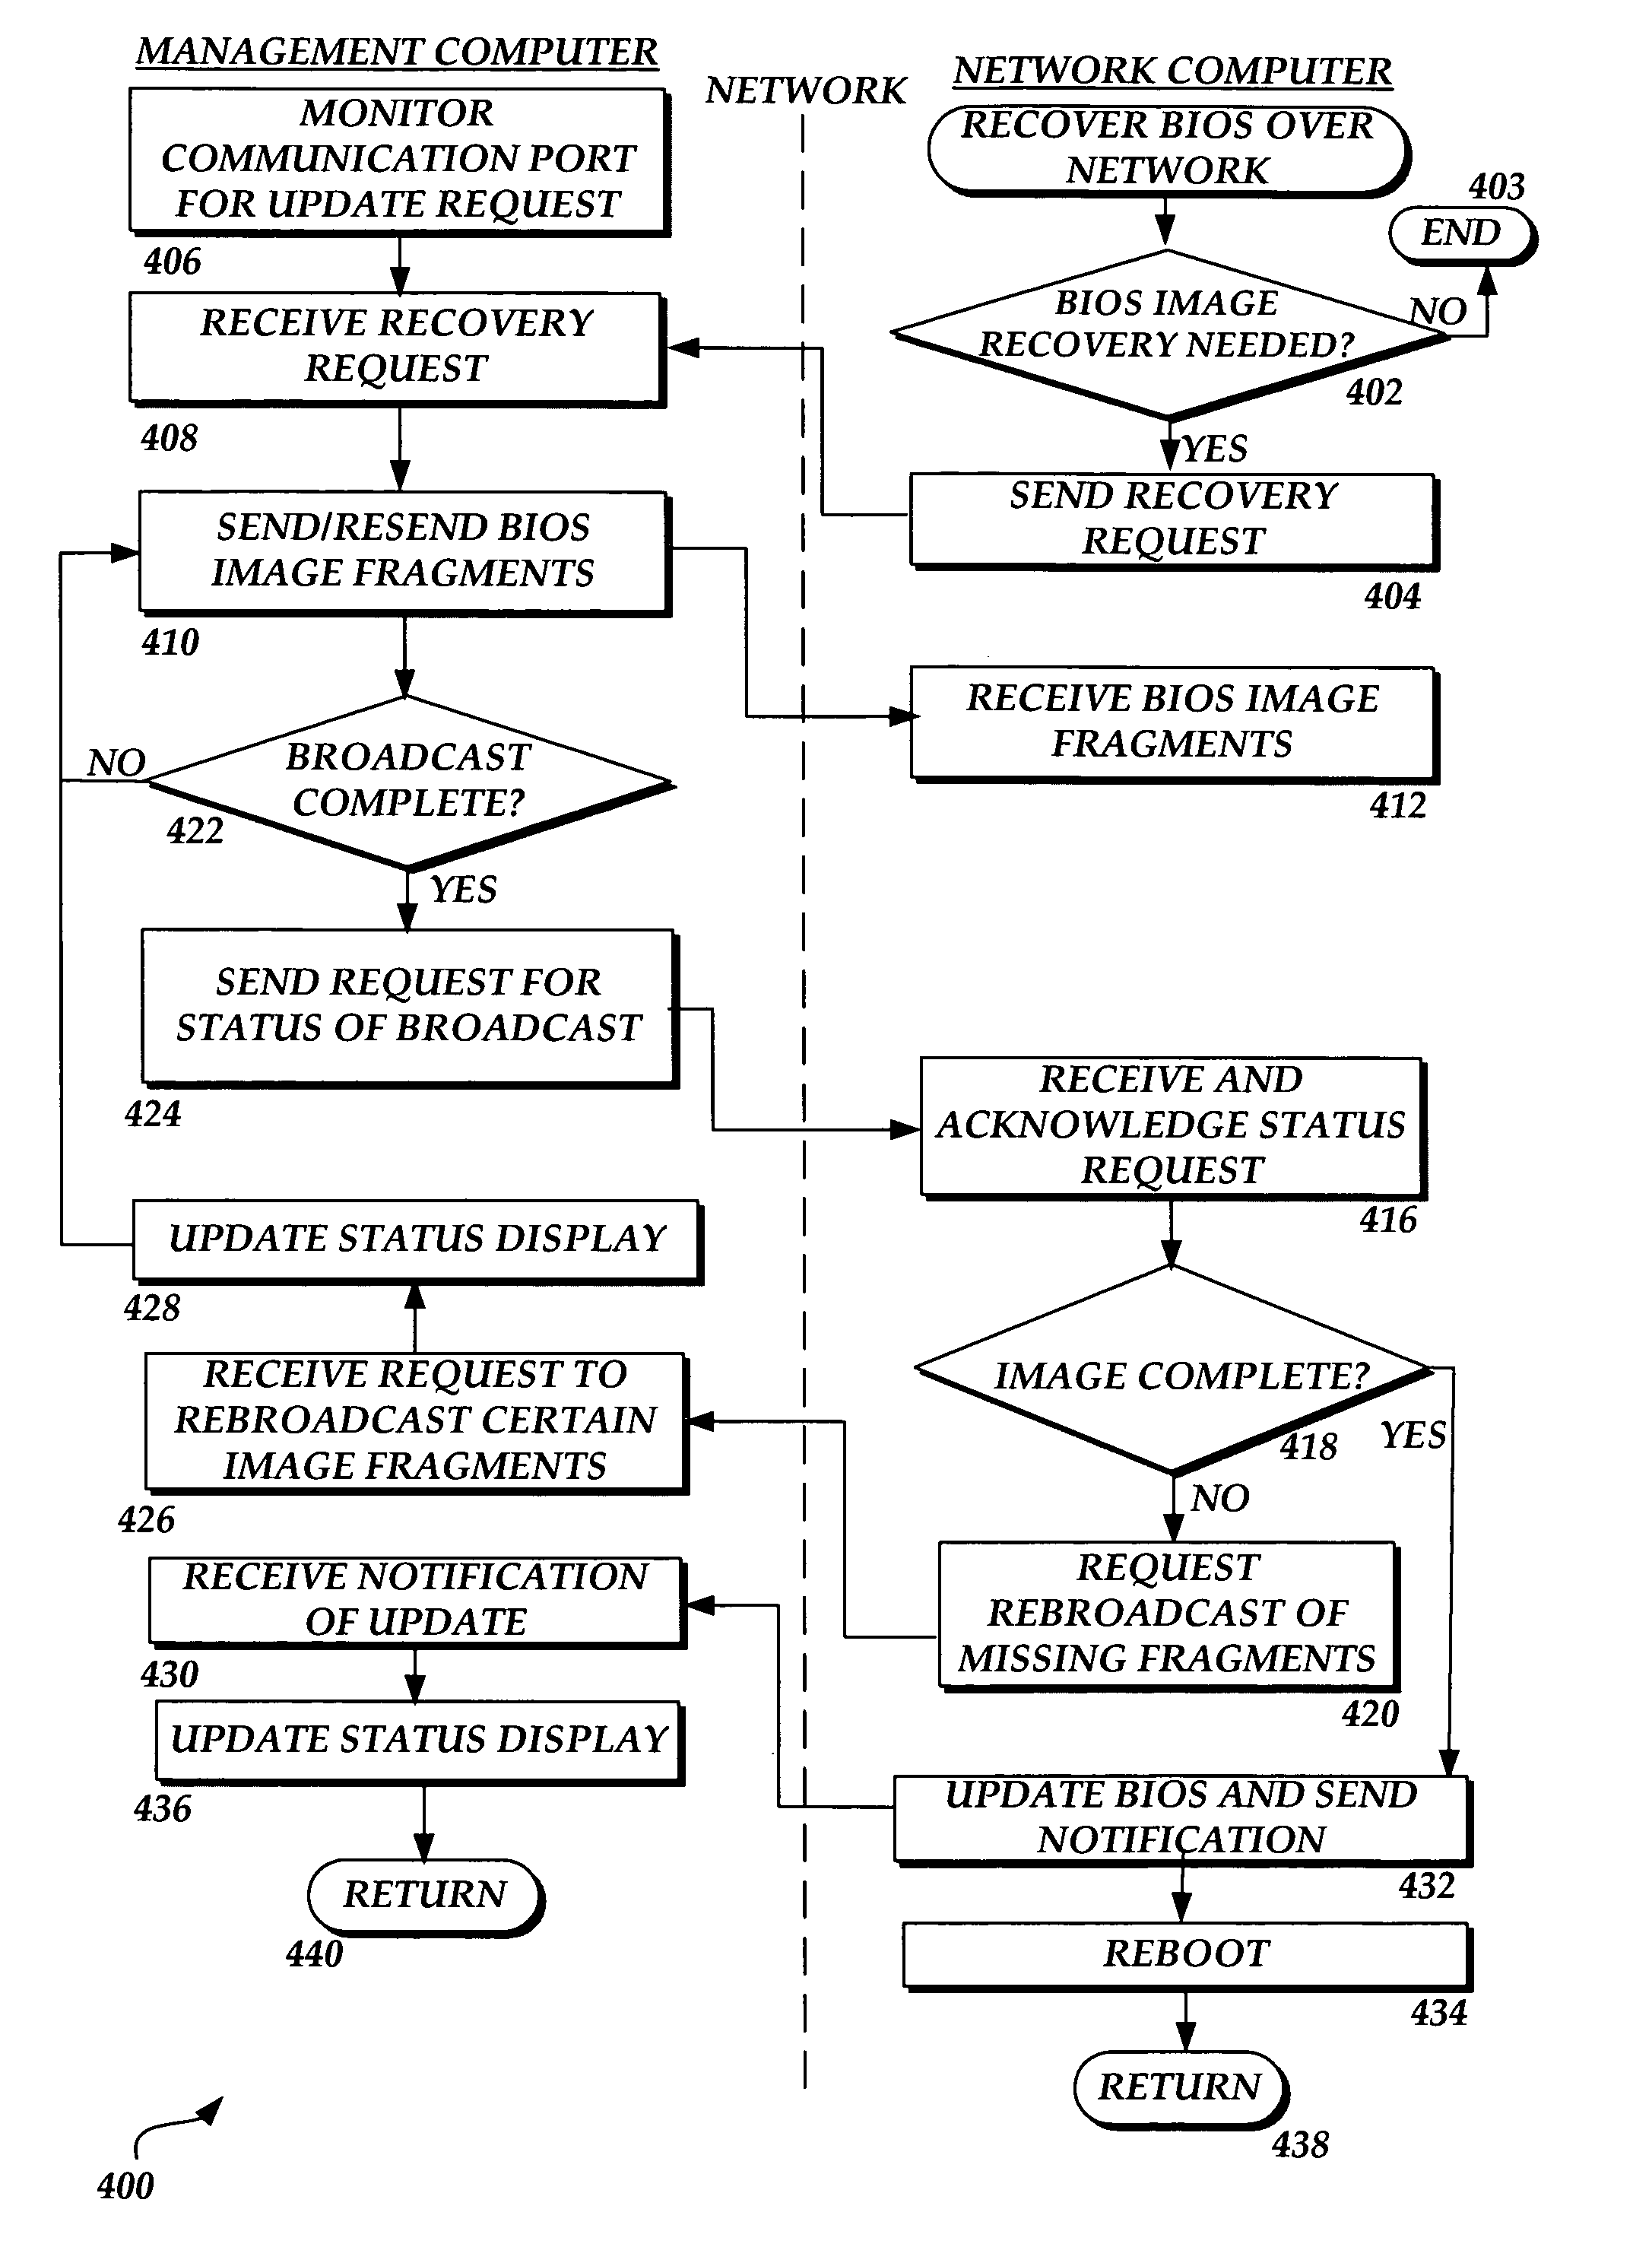 Methods and systems for updating and recovering firmware within a computing device over a distributed network